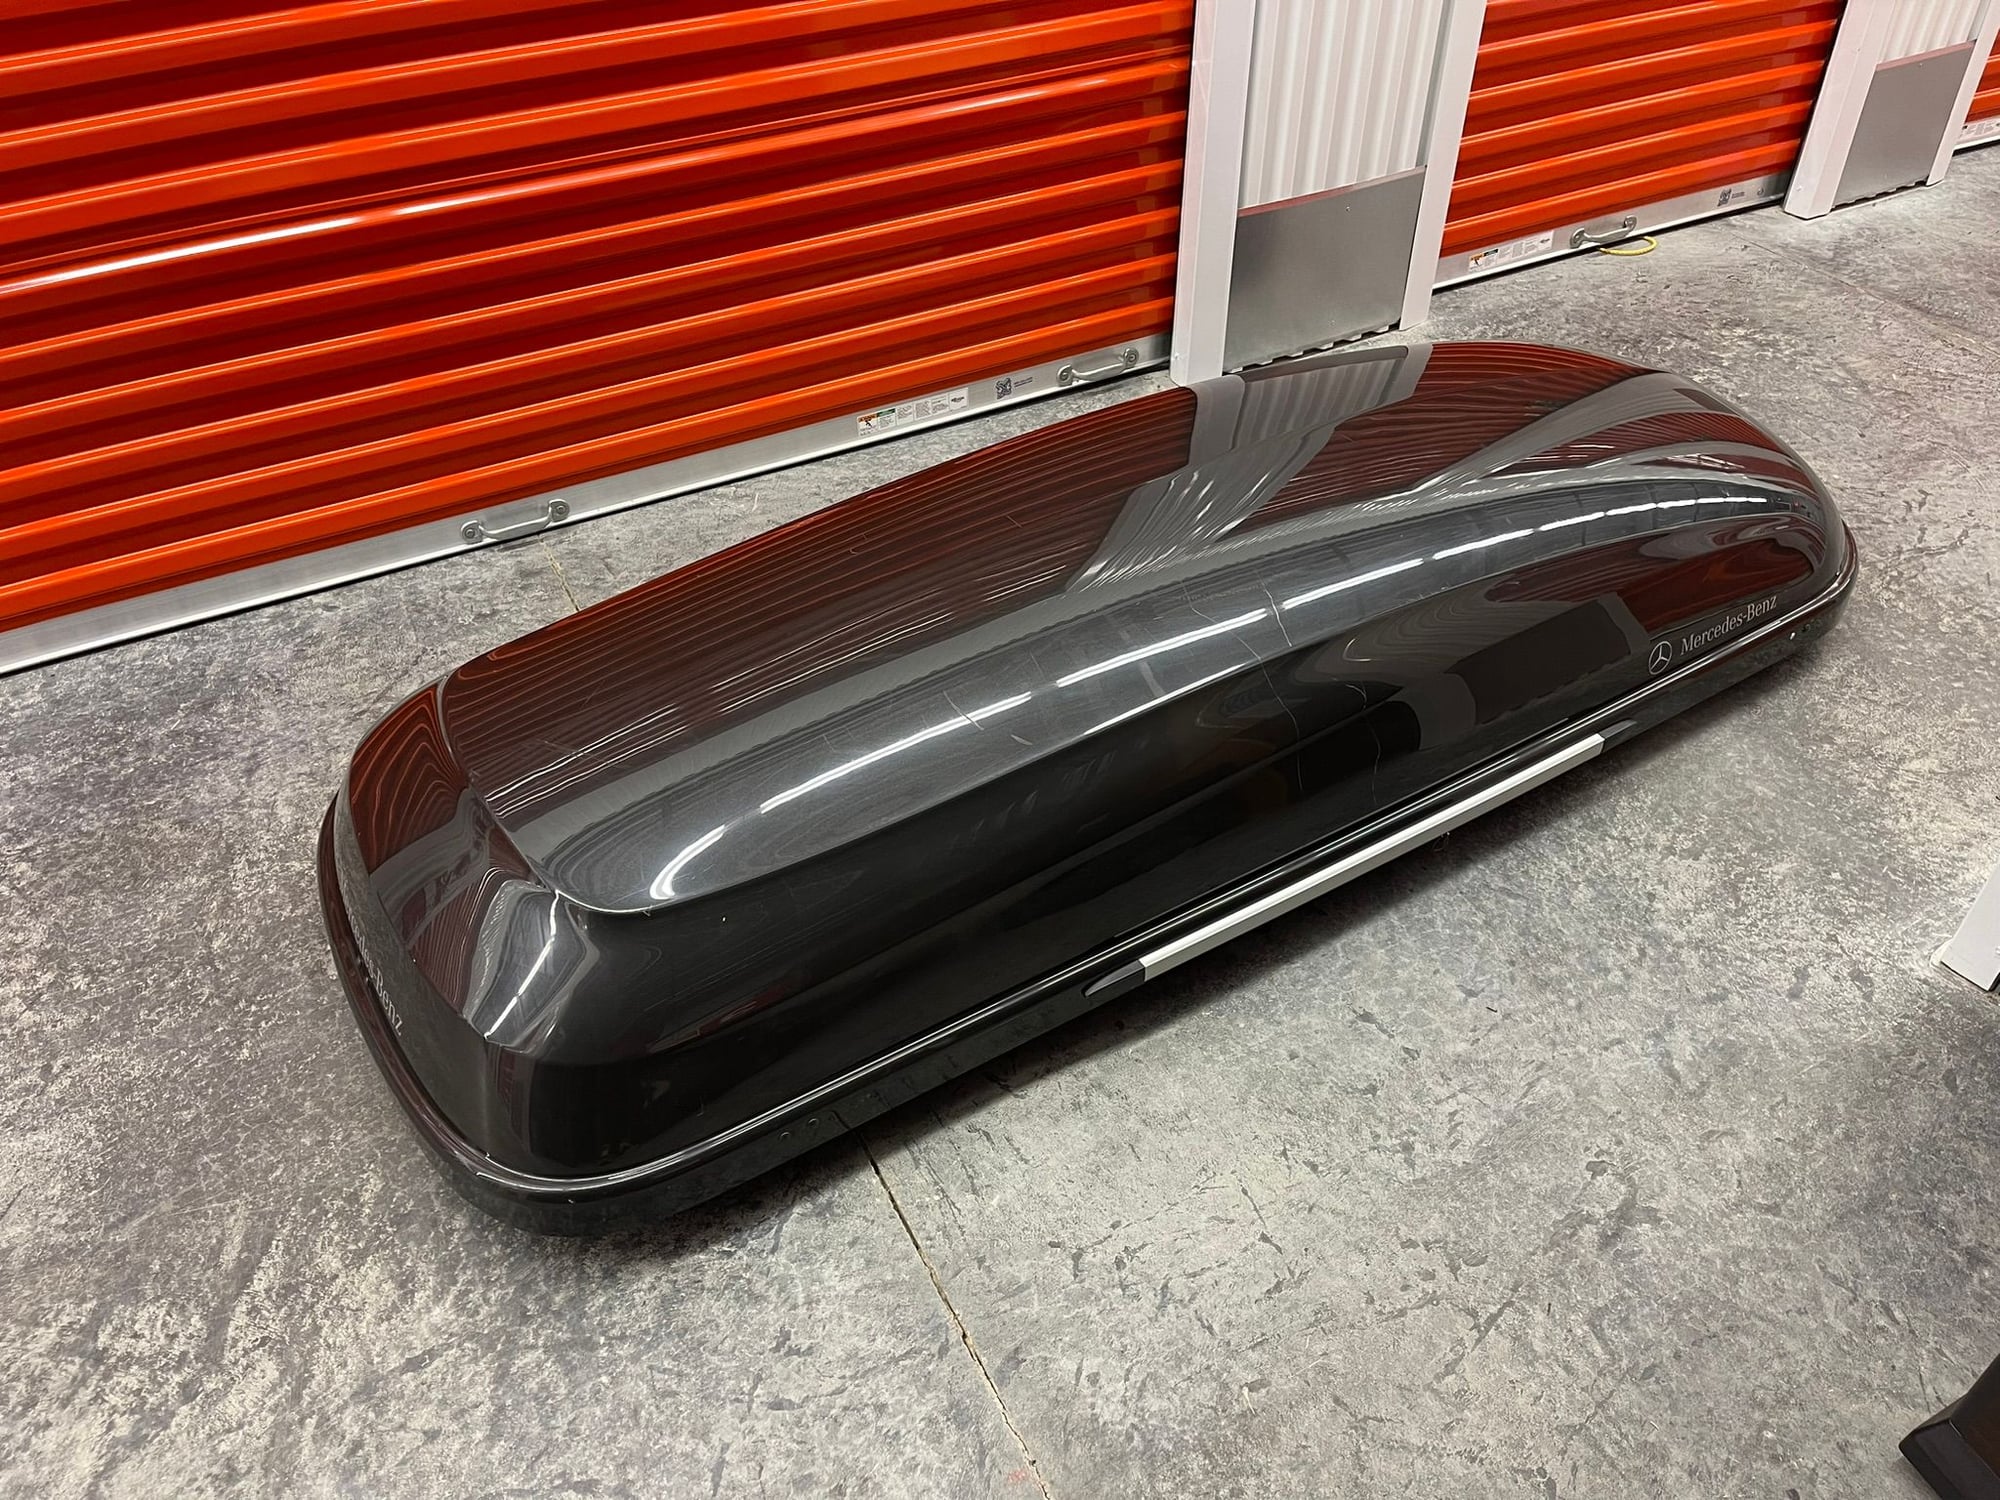 Accessories - MB OE Accessory - Roof Box 450 (Cargo Carrier) - Used - Lincolnshire, IL 60069, United States